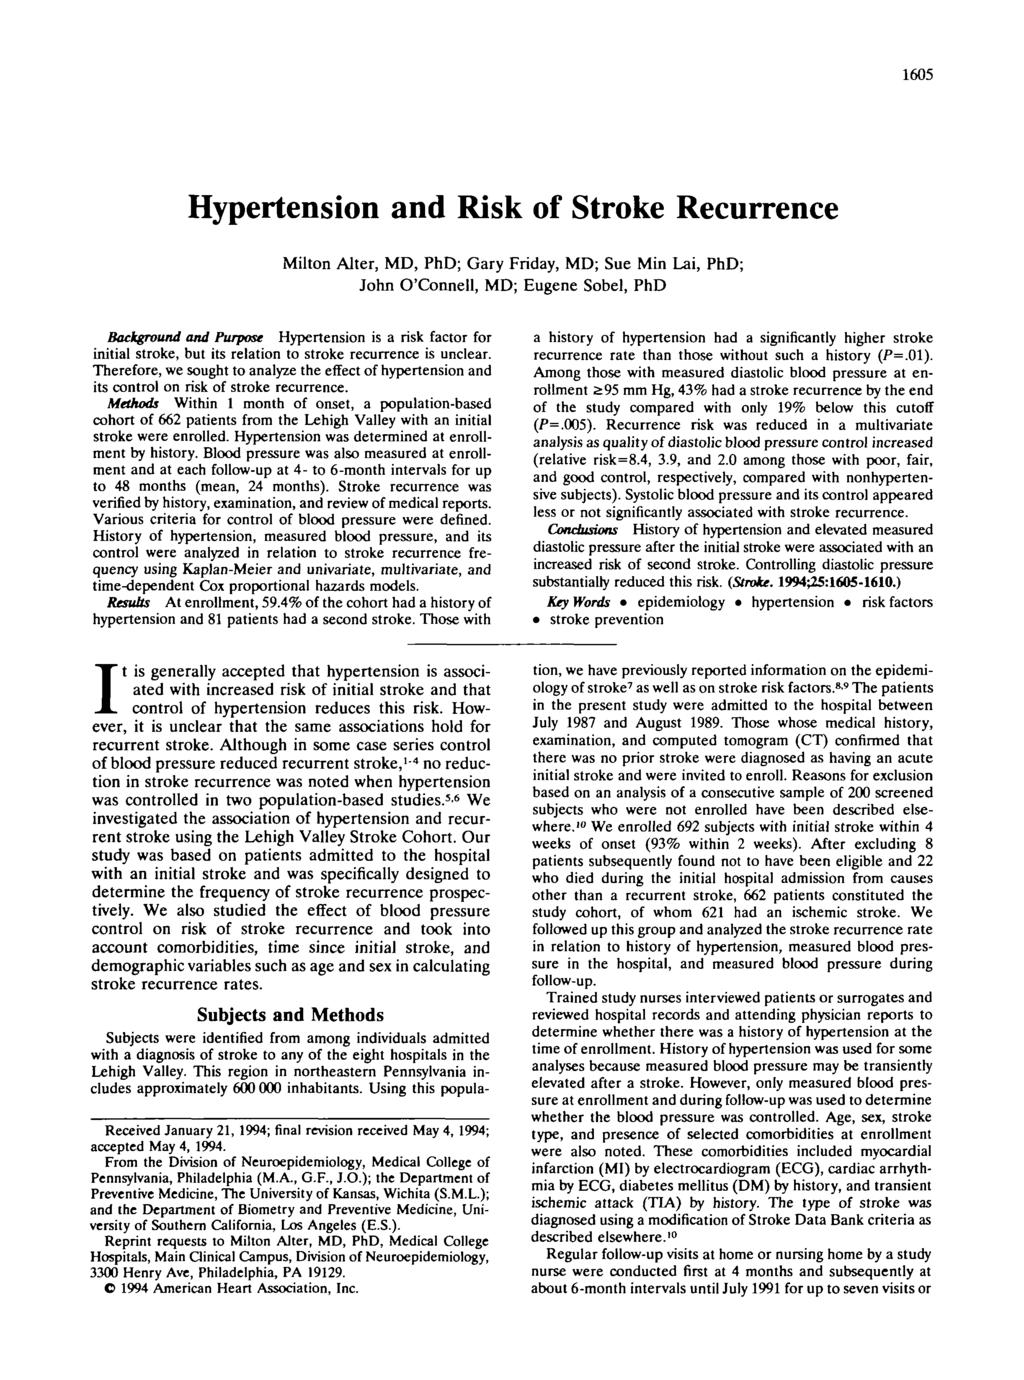 1605 Hypertension and Risk of Stroke Recurrence Milton Alter, MD, PhD; Gary Friday, MD; Sue Min Lai, PhD; John O'Connell, MD; Eugene Sobel, PhD Background and Purpose Hypertension is a risk factor